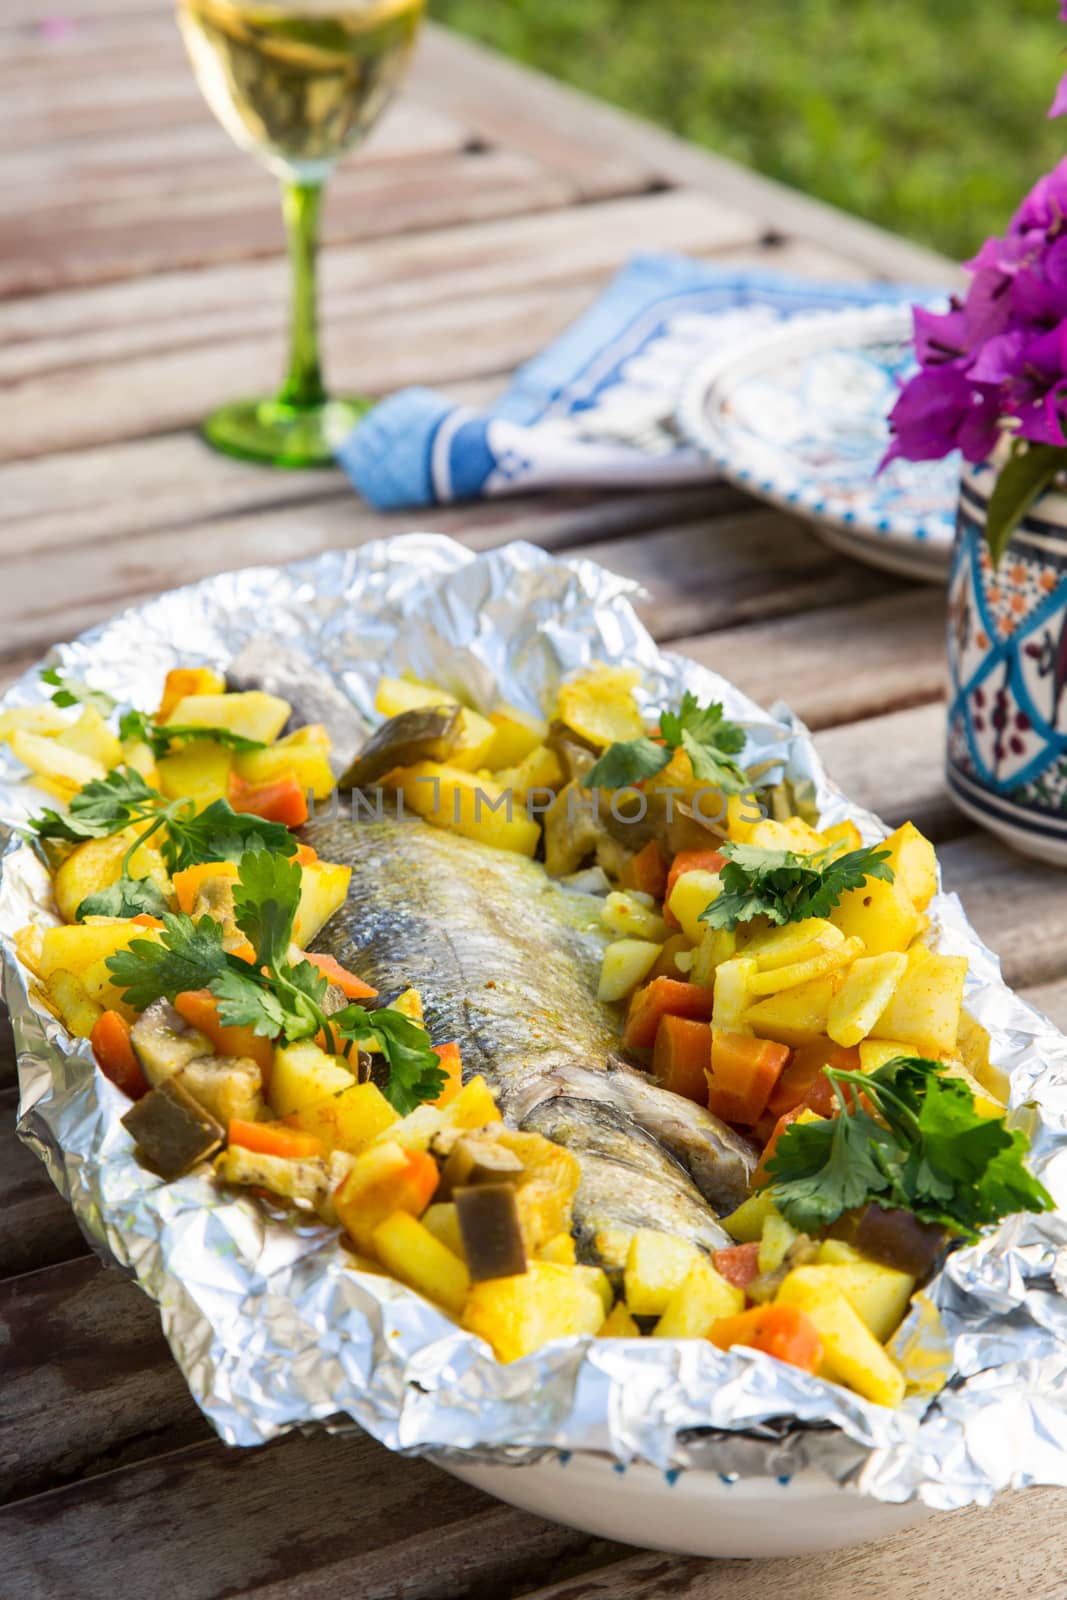 Baked sea bass with vegetables by tolikoff_photography